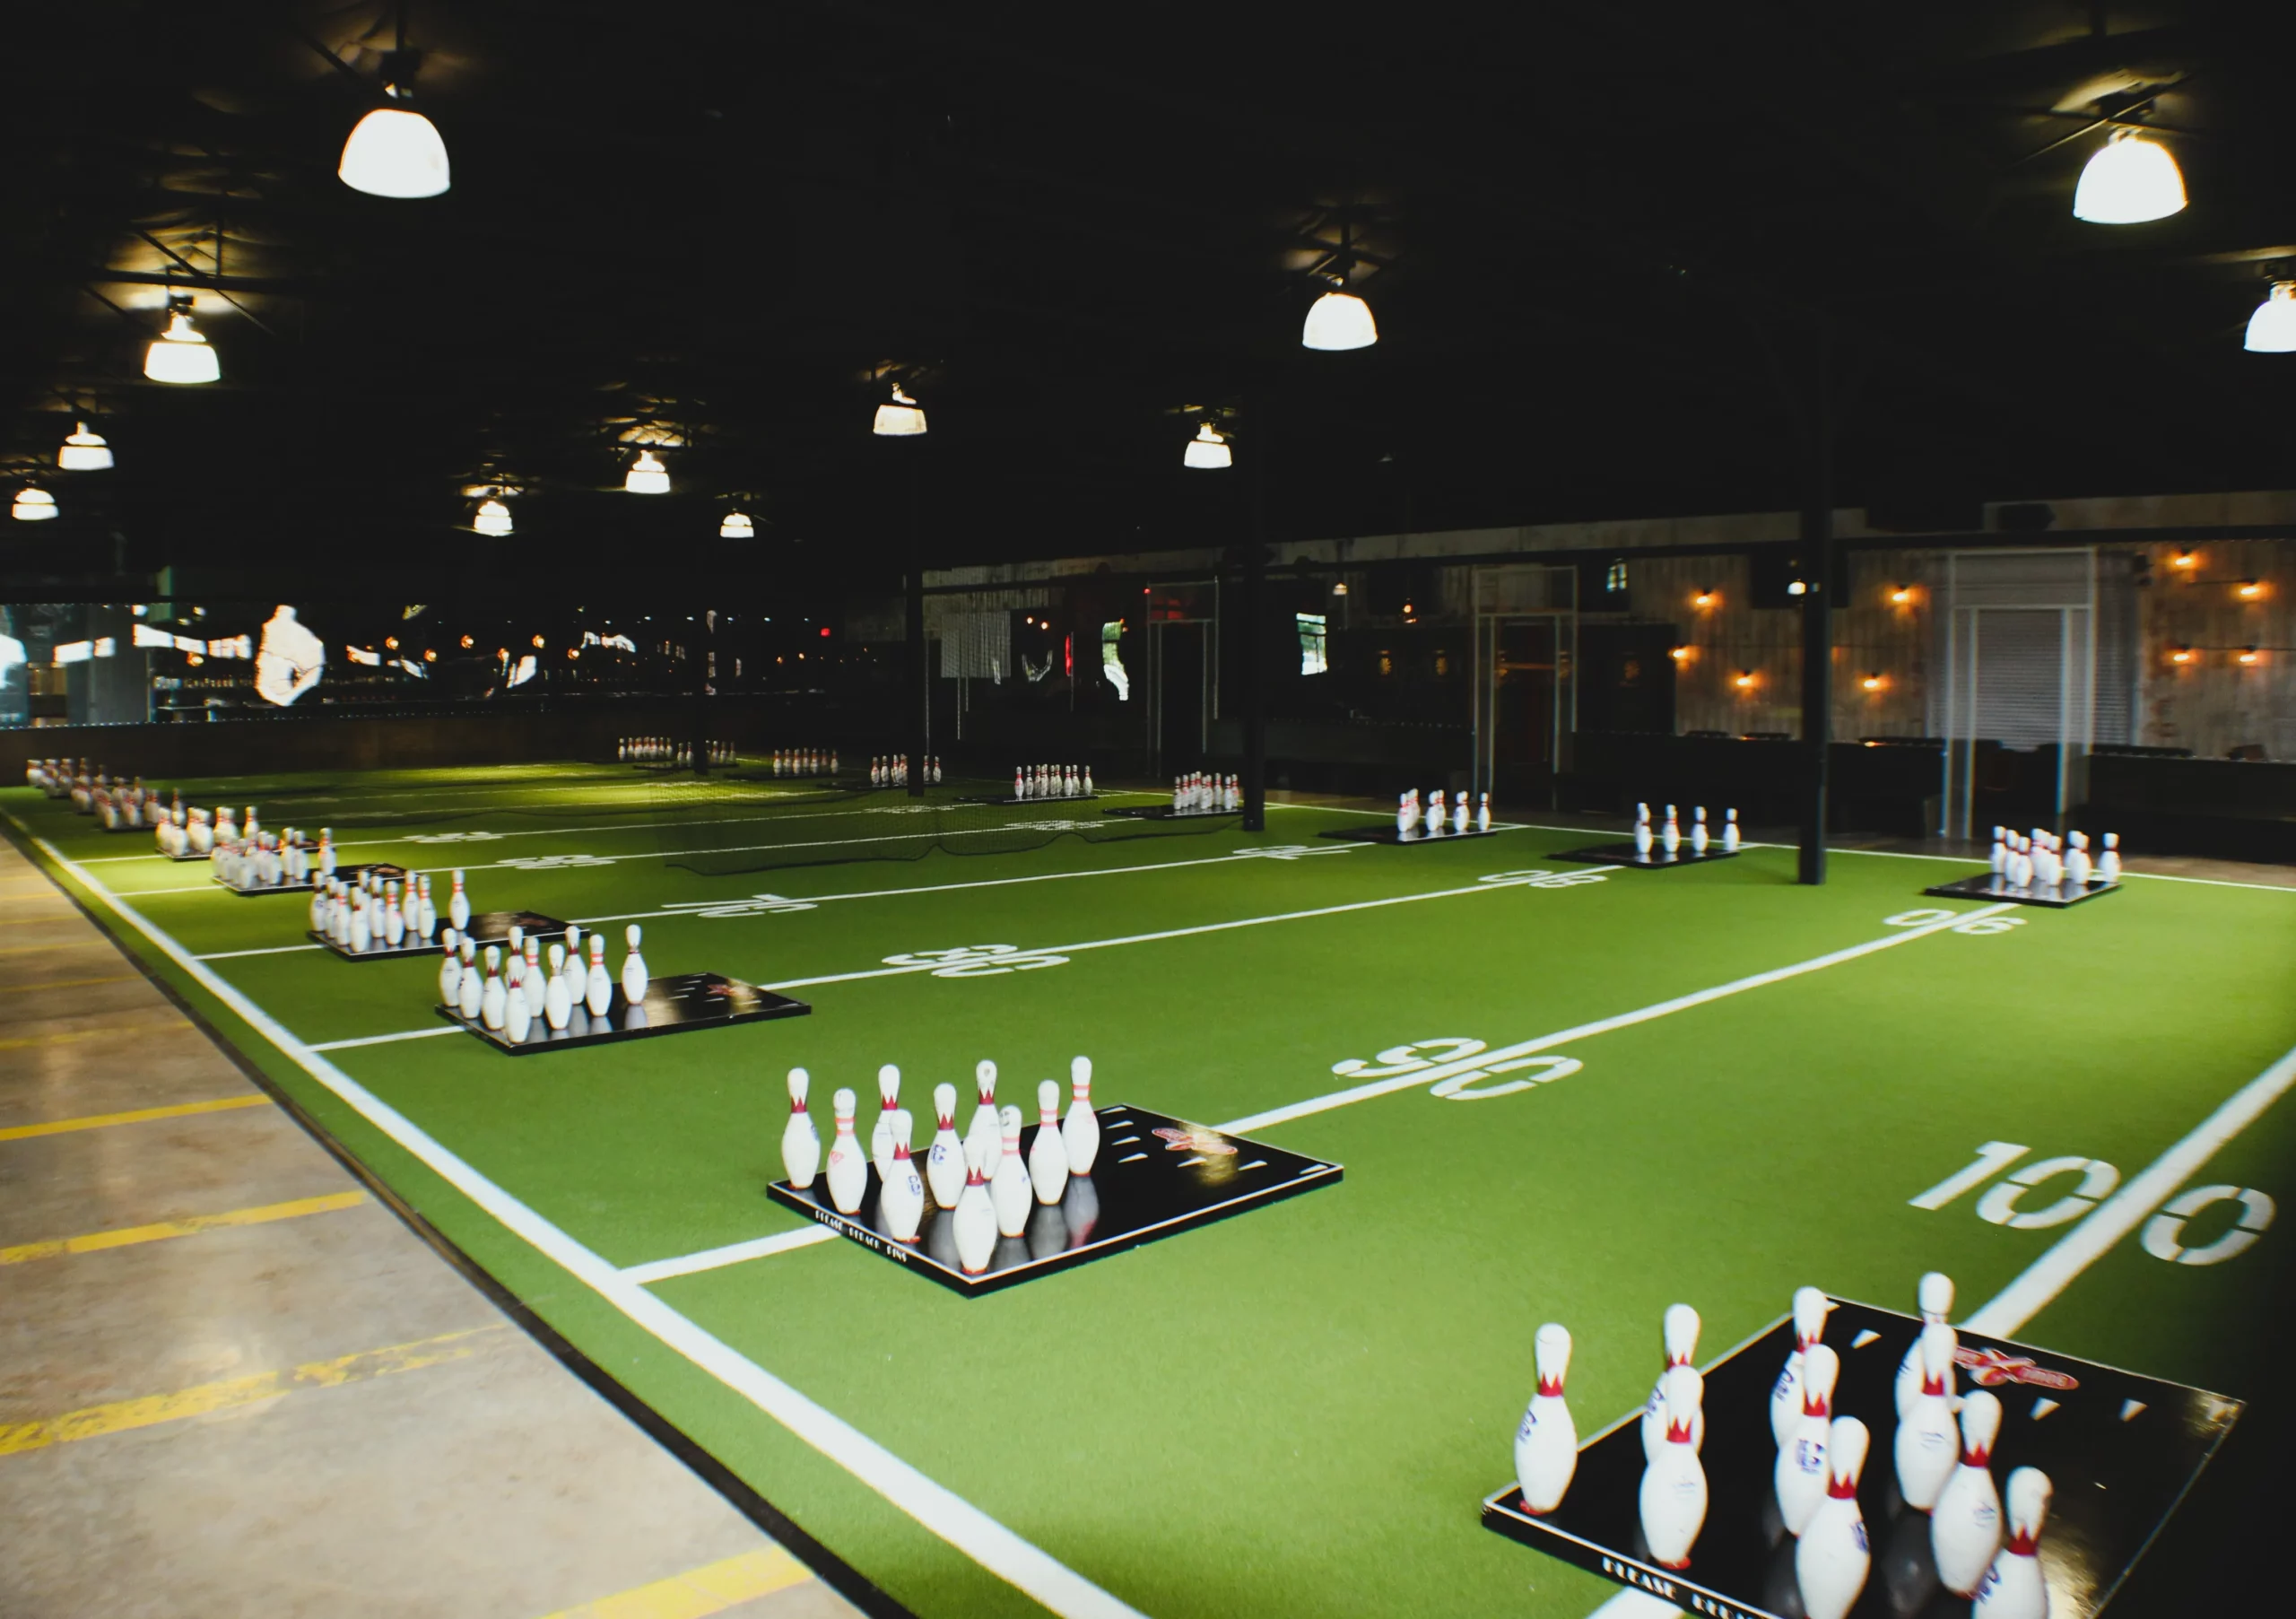 Get ready to toss! This action-packed PinToss field at BowGames brings friends together for competitive fun, food, and drinks.